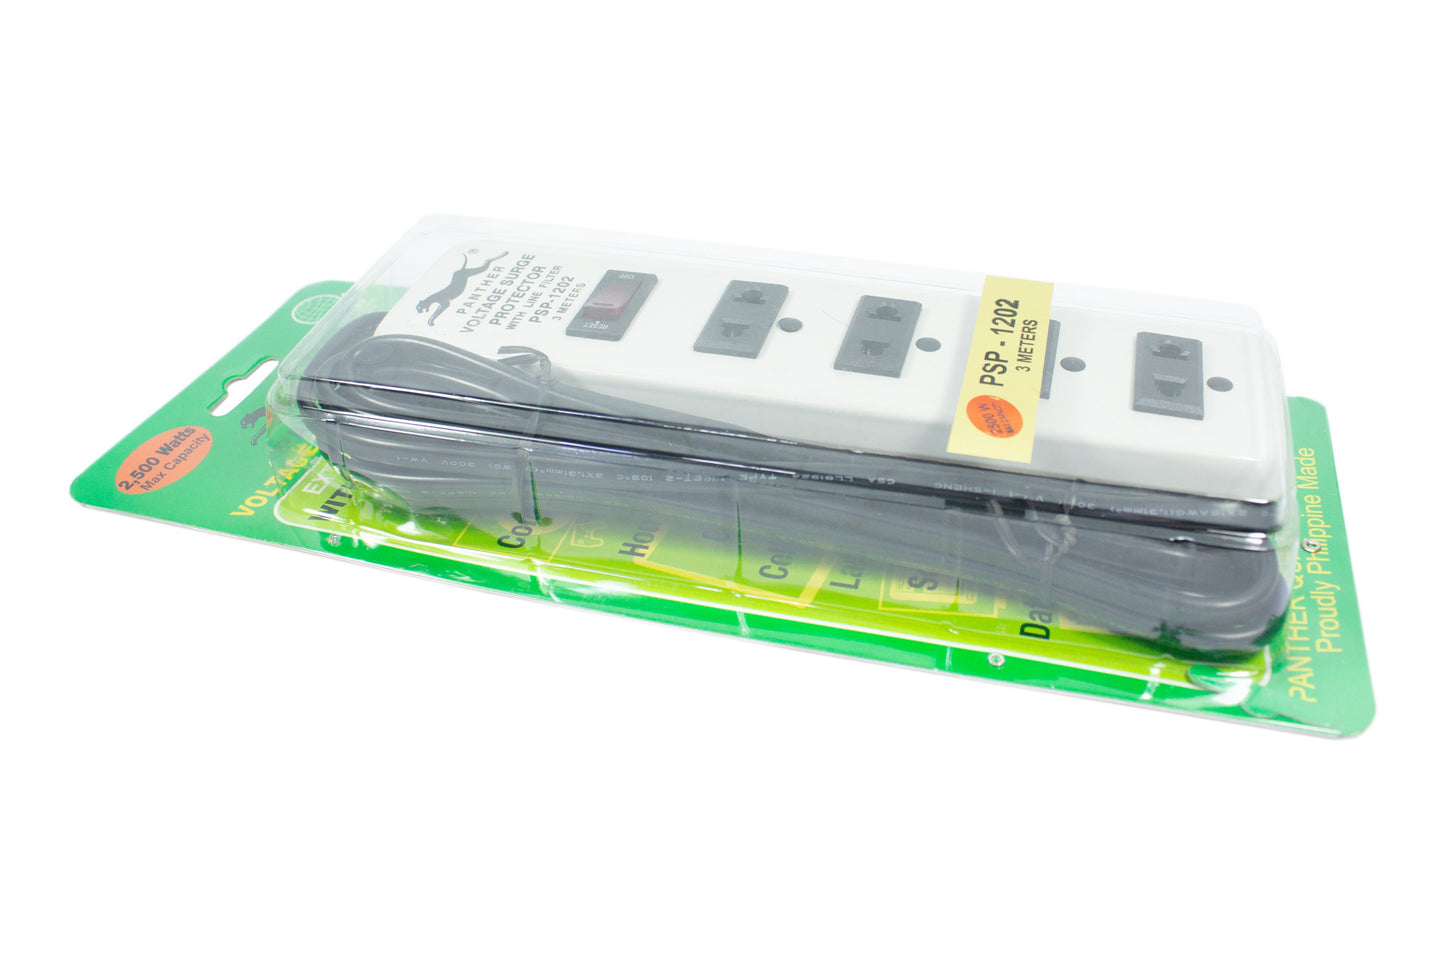 Panther 3M (PSP-1202) Voltage Surge Protector